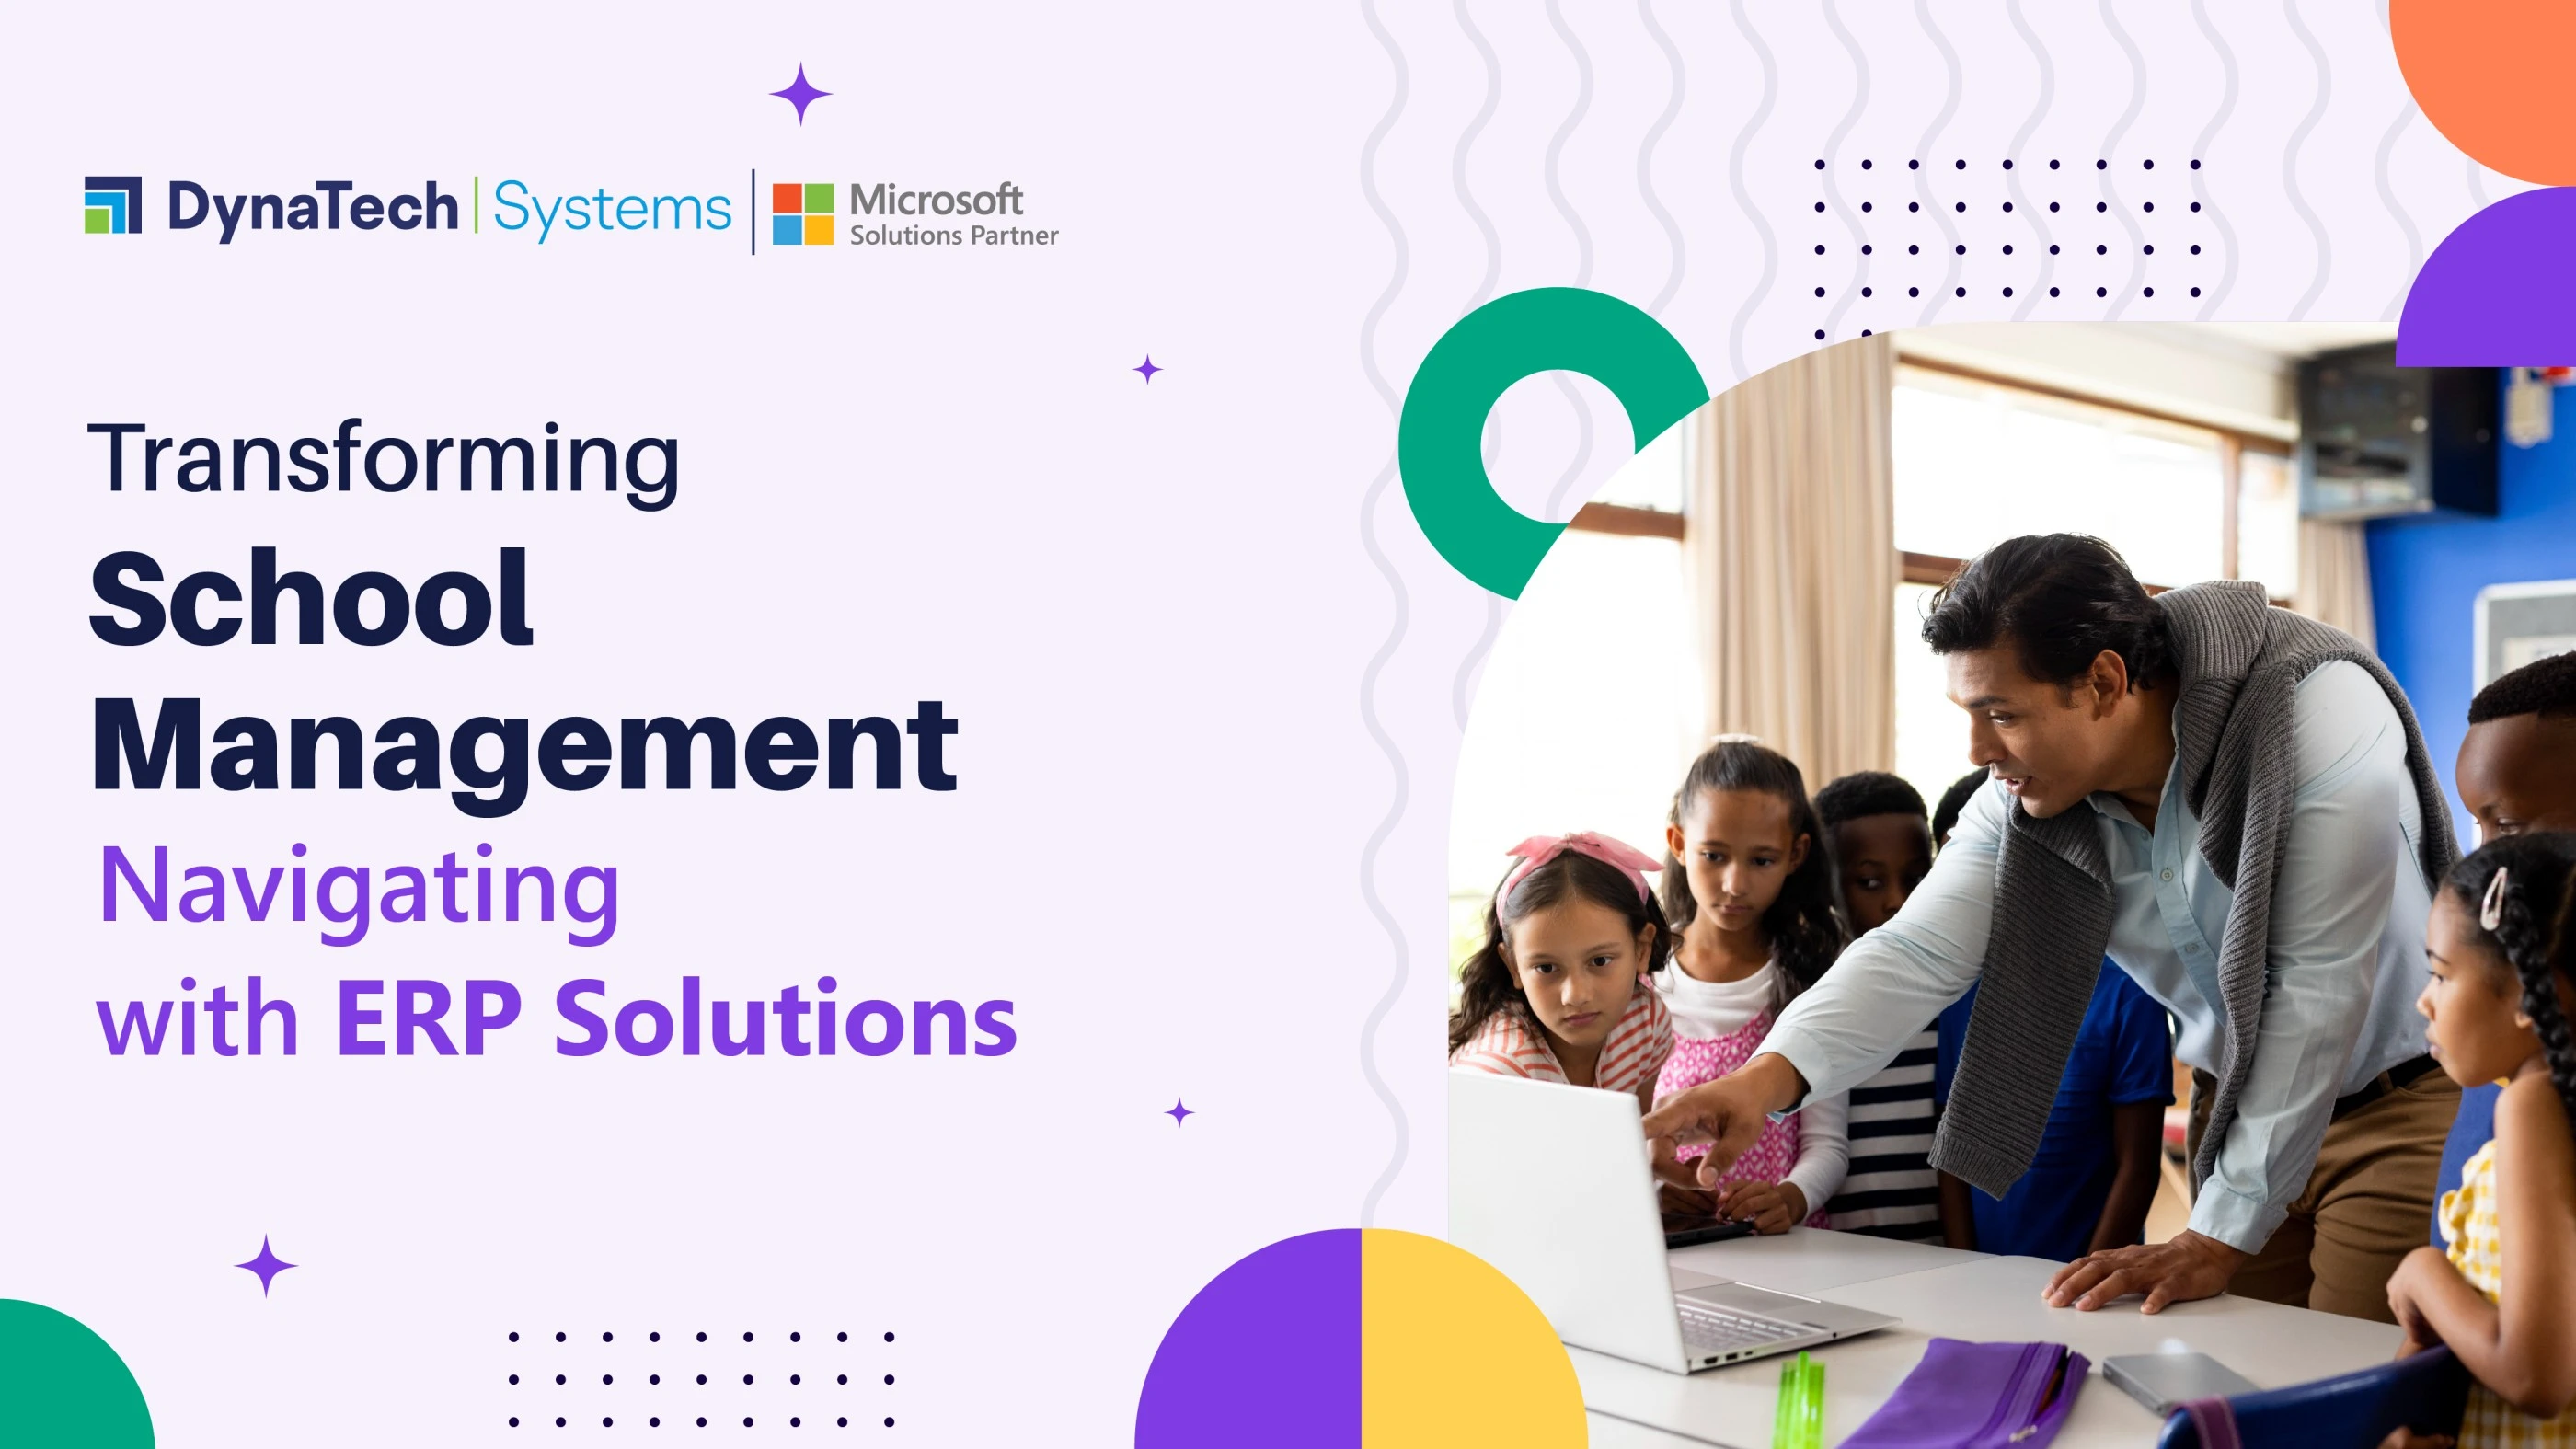 Transforming School Management: Navigating with ERP Solutions